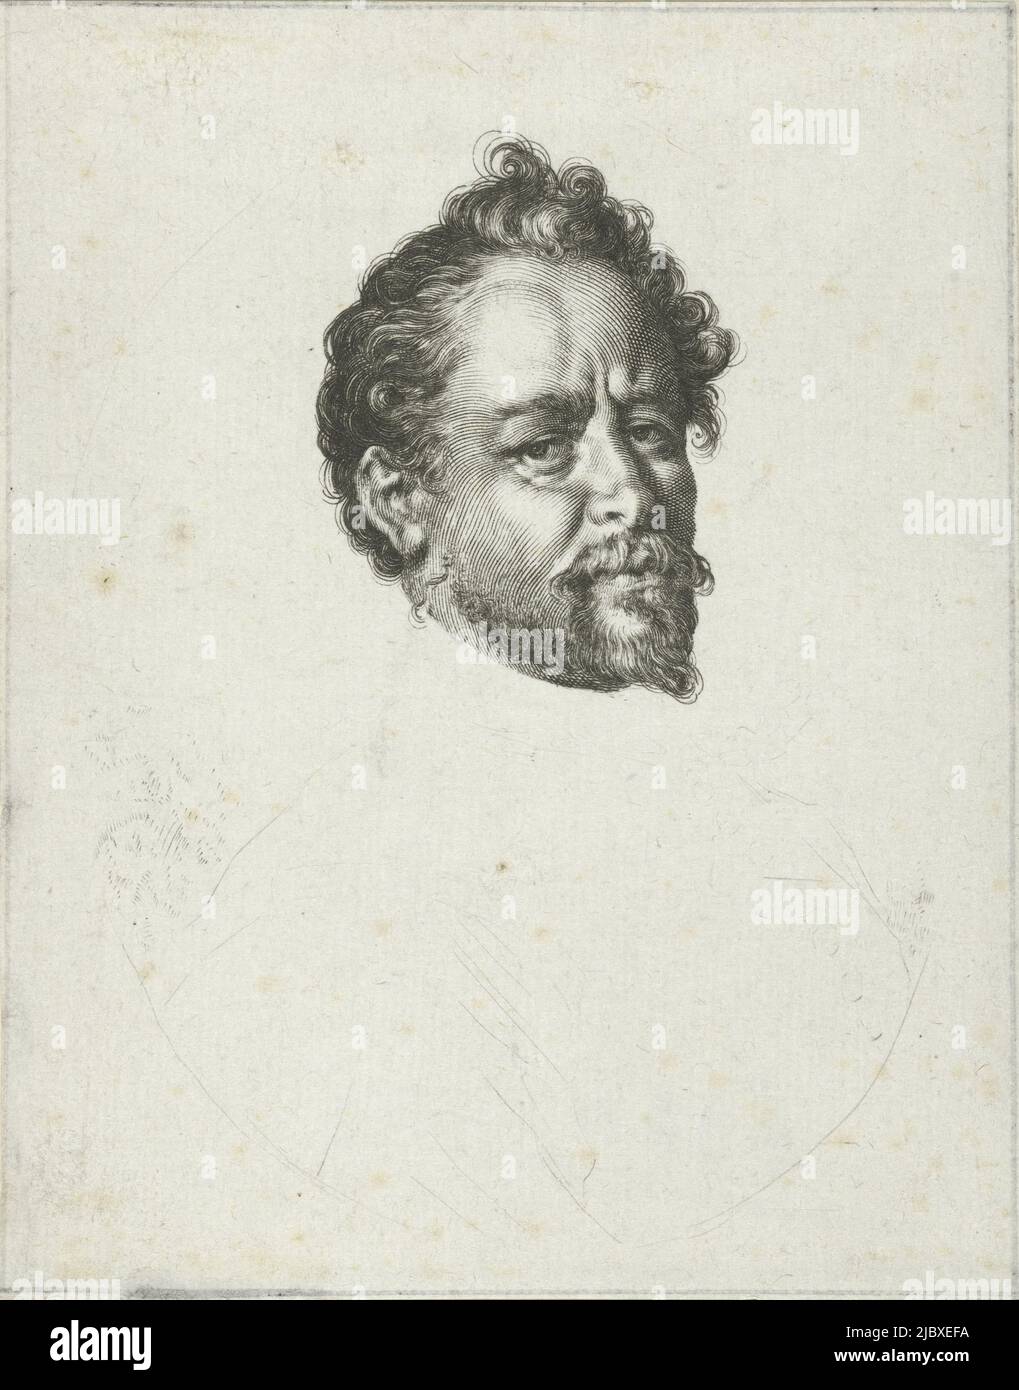 Portrait of painter and printmaker Bartholomeus Spranger, Portrait of Bartholomeus Spranger, print maker: Jan Harmensz. Muller, after: Hans von Aachen, Amsterdam, 1597, paper, engraving, drypoint, h 136 mm × w 107 mm Stock Photo